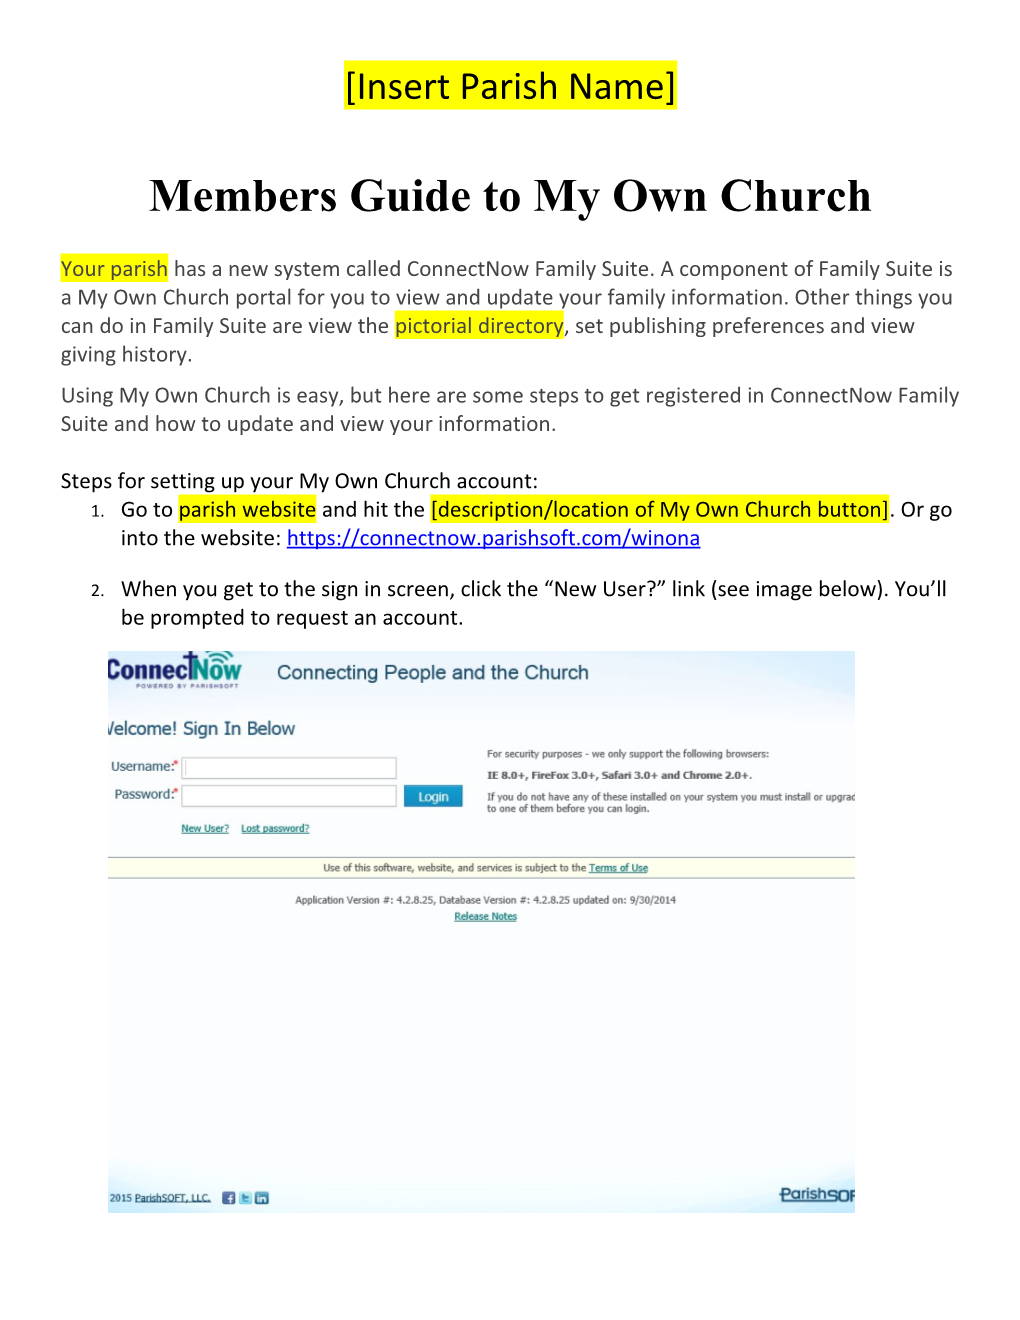 Members Guide to My Own Church